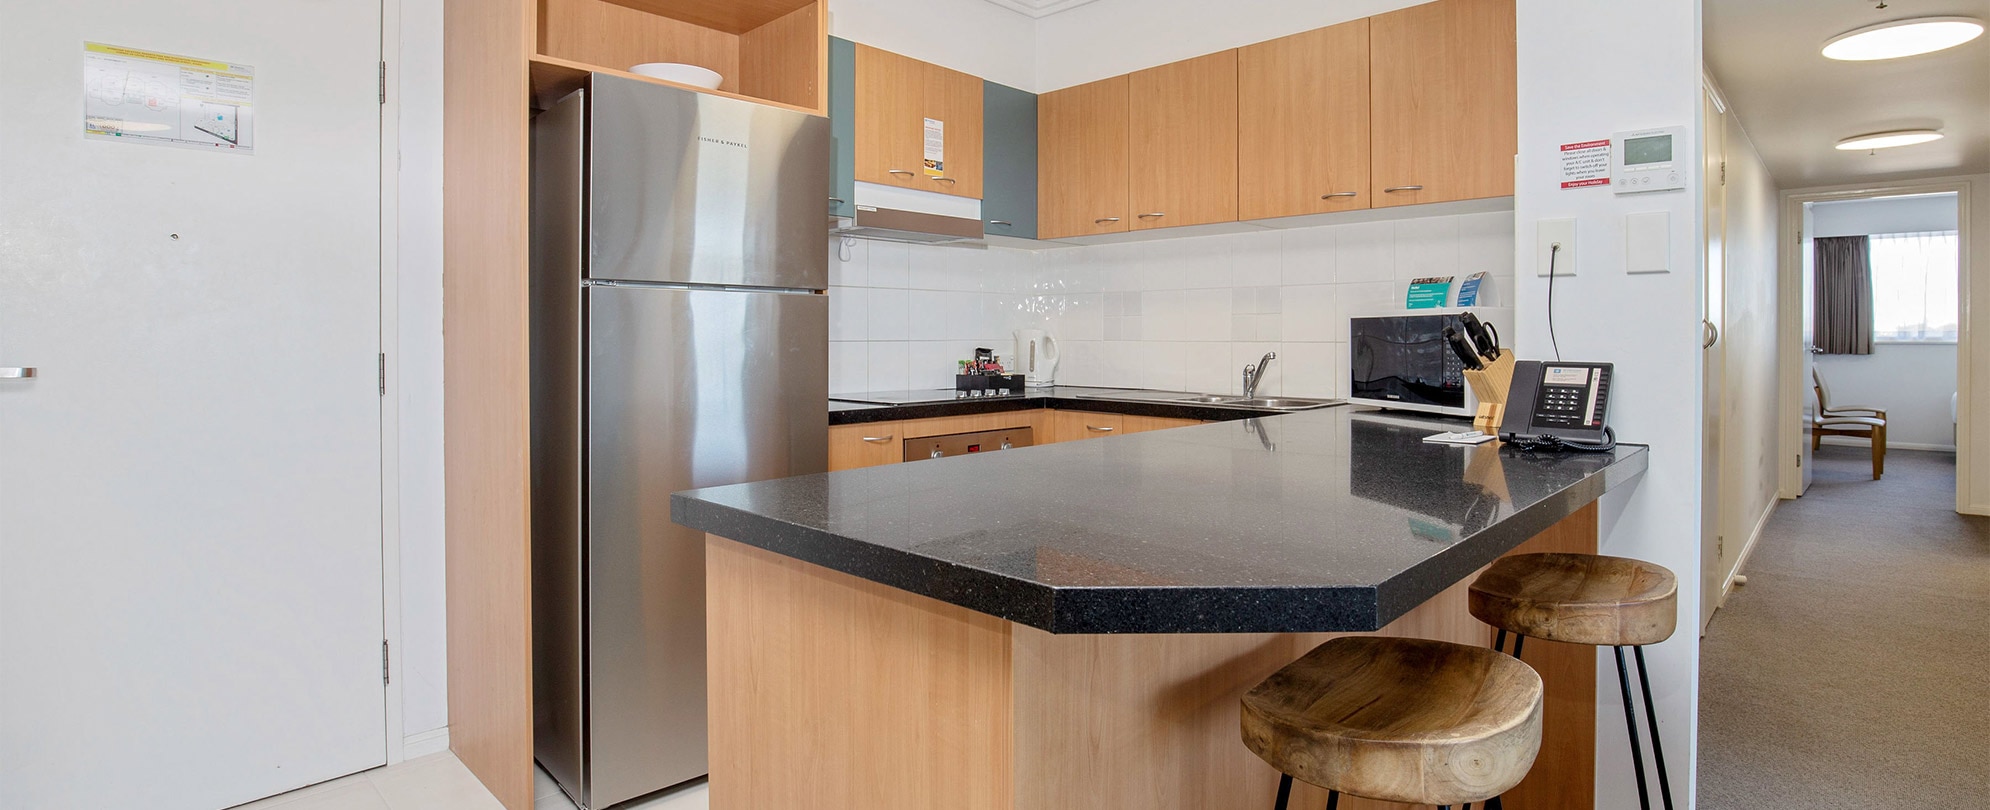 The kitchen of a Club Wyndham Kirra Beach standard suite with a full fridge, microwave, stove, countertop bar, and sink.